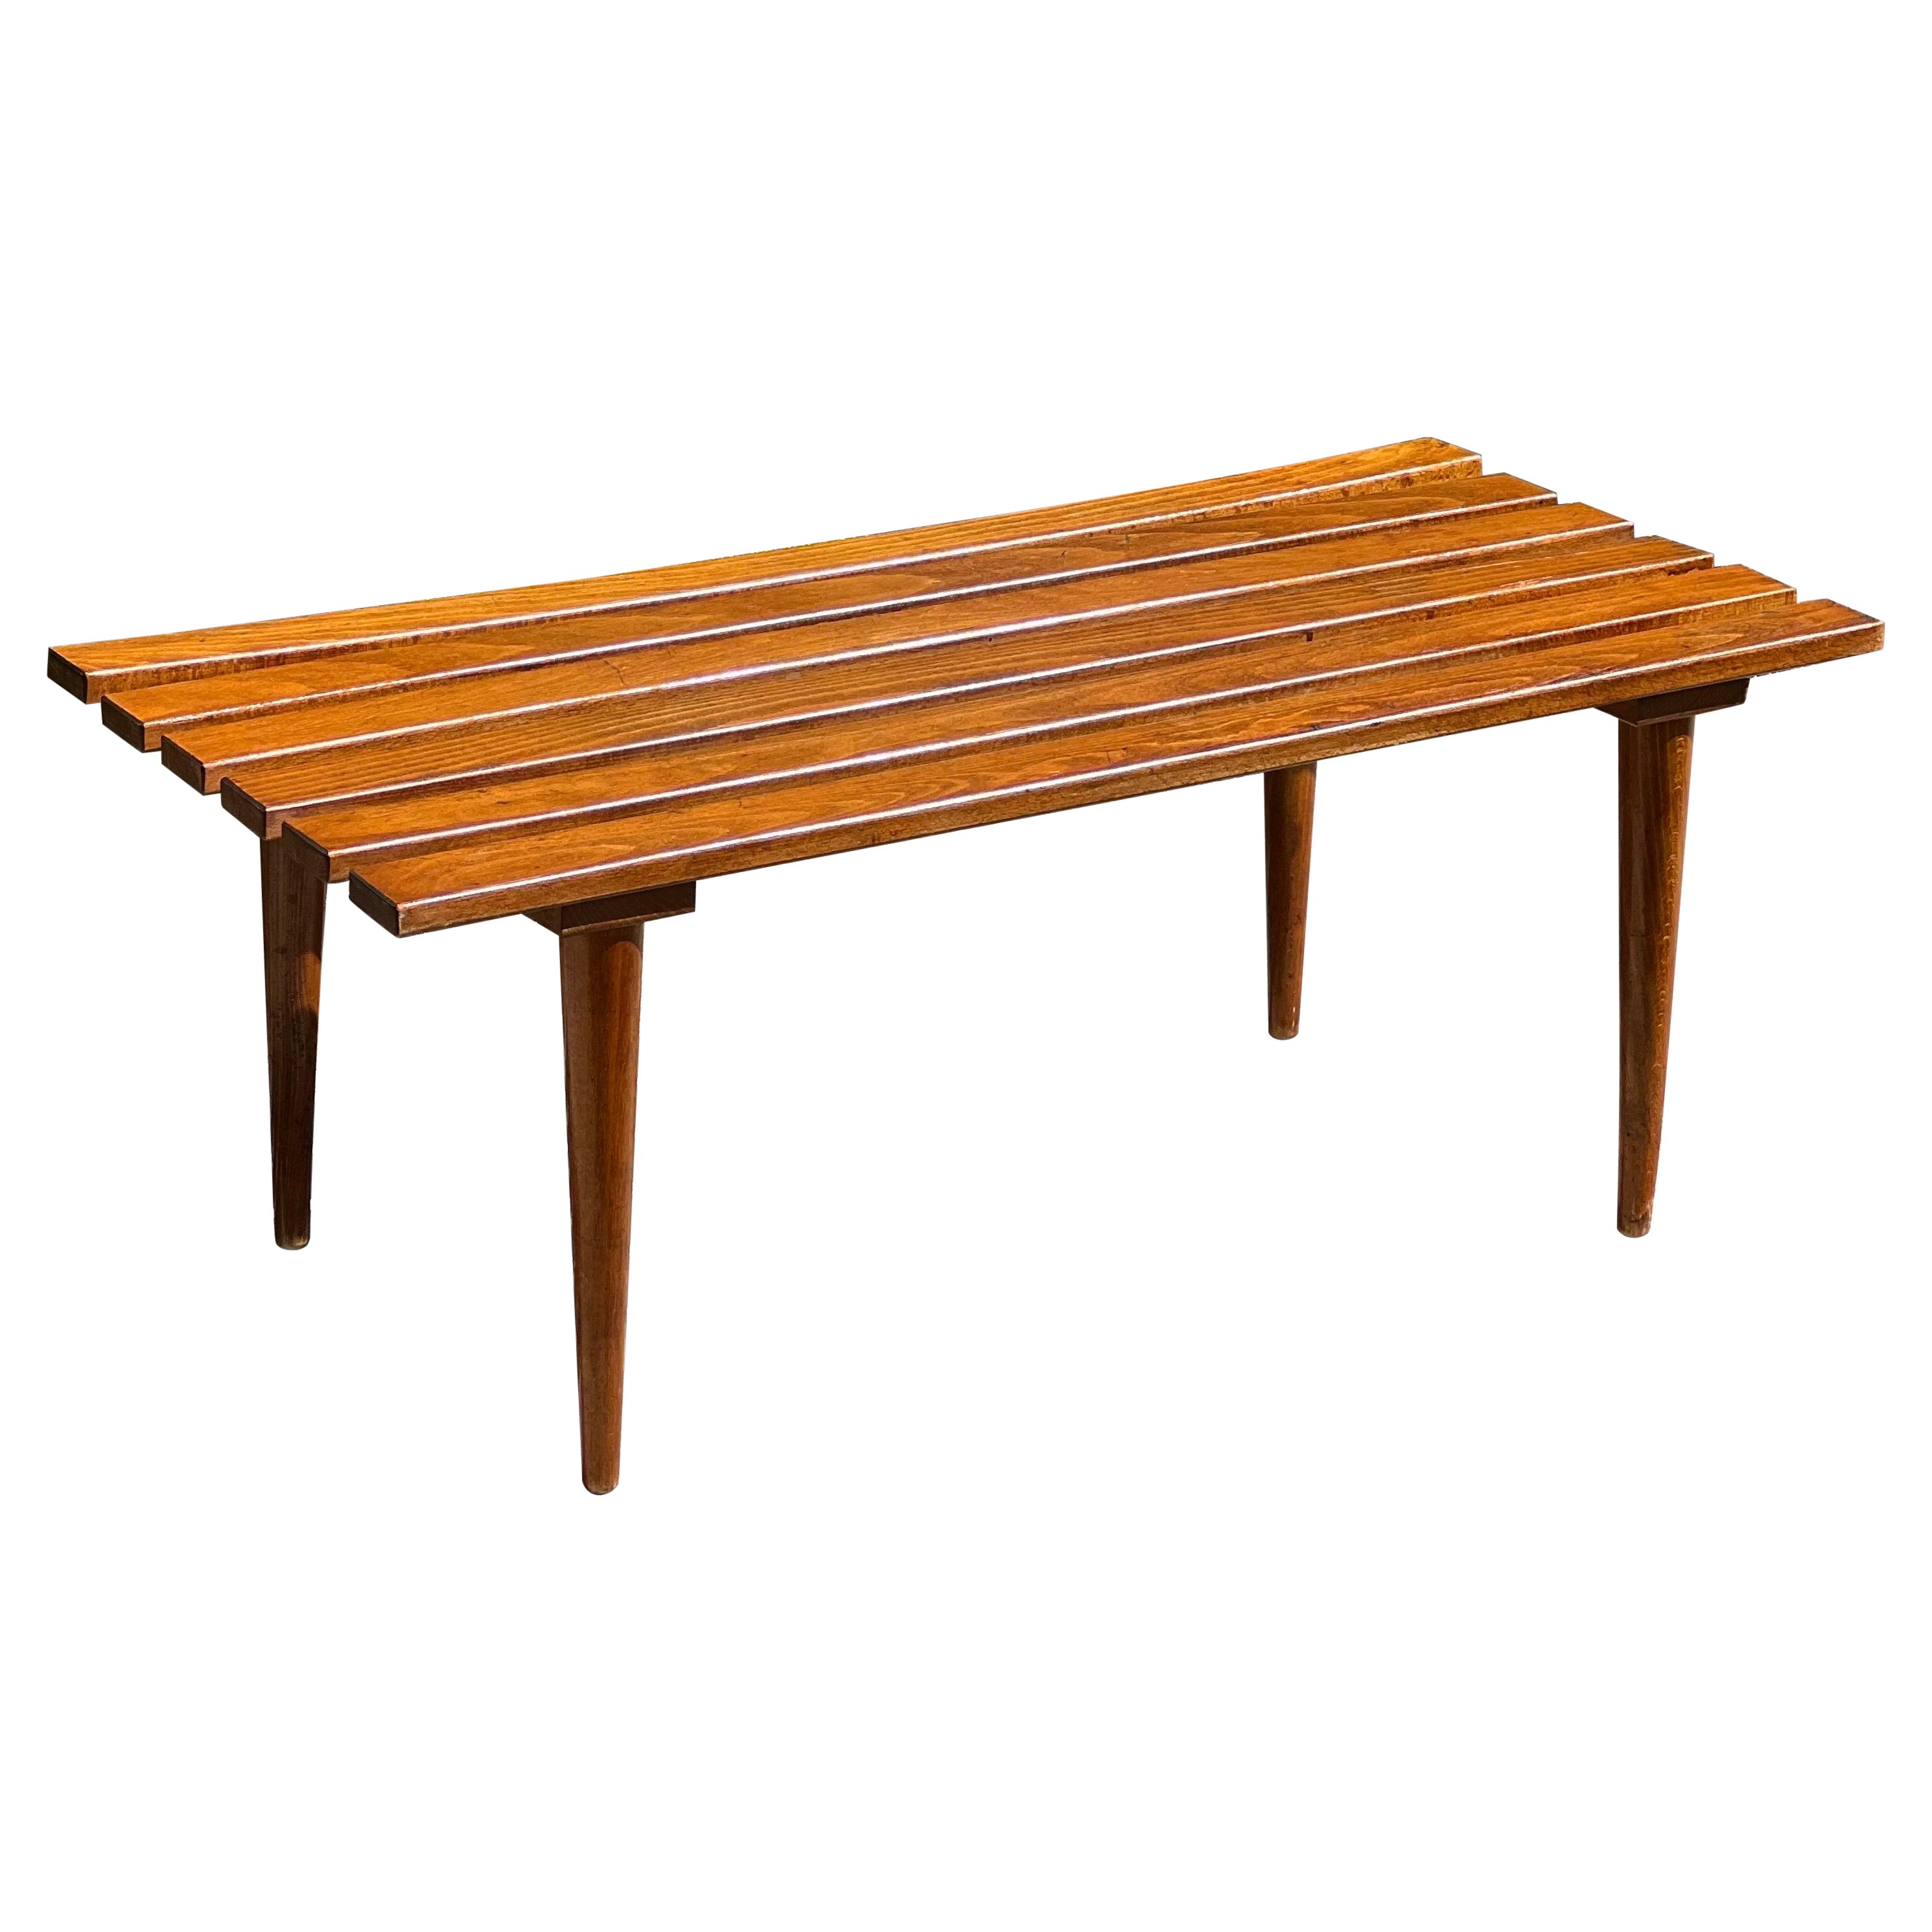 Vintage Mid-Century Modern Slat Bench or Coffee Table For Sale